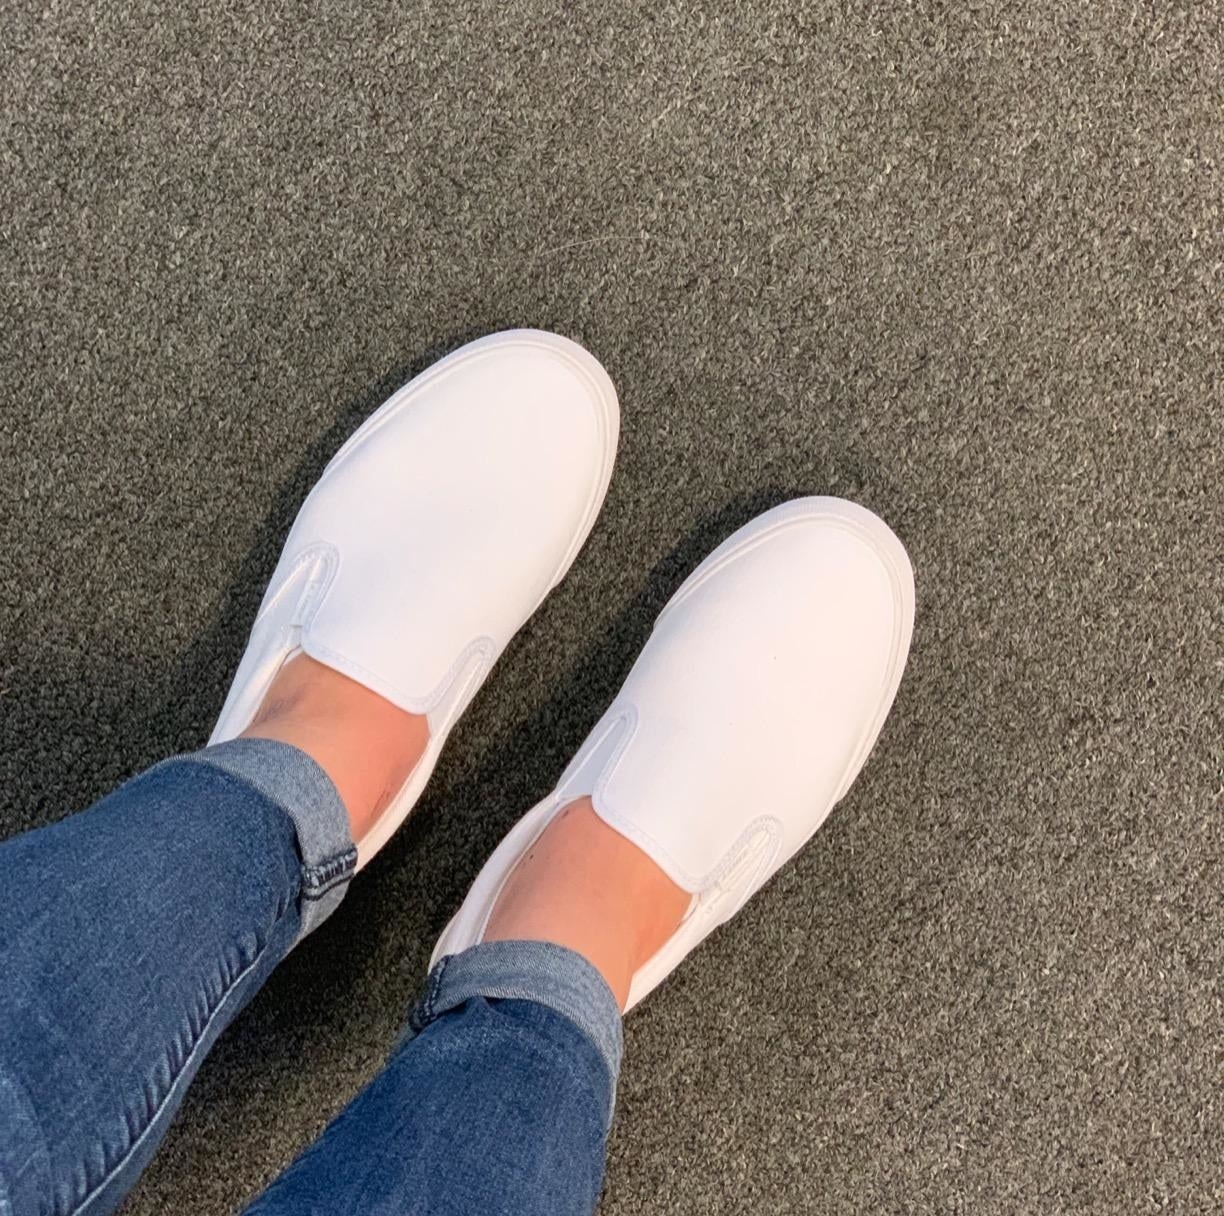 Reviewer wearing jeans and white slip on shoes